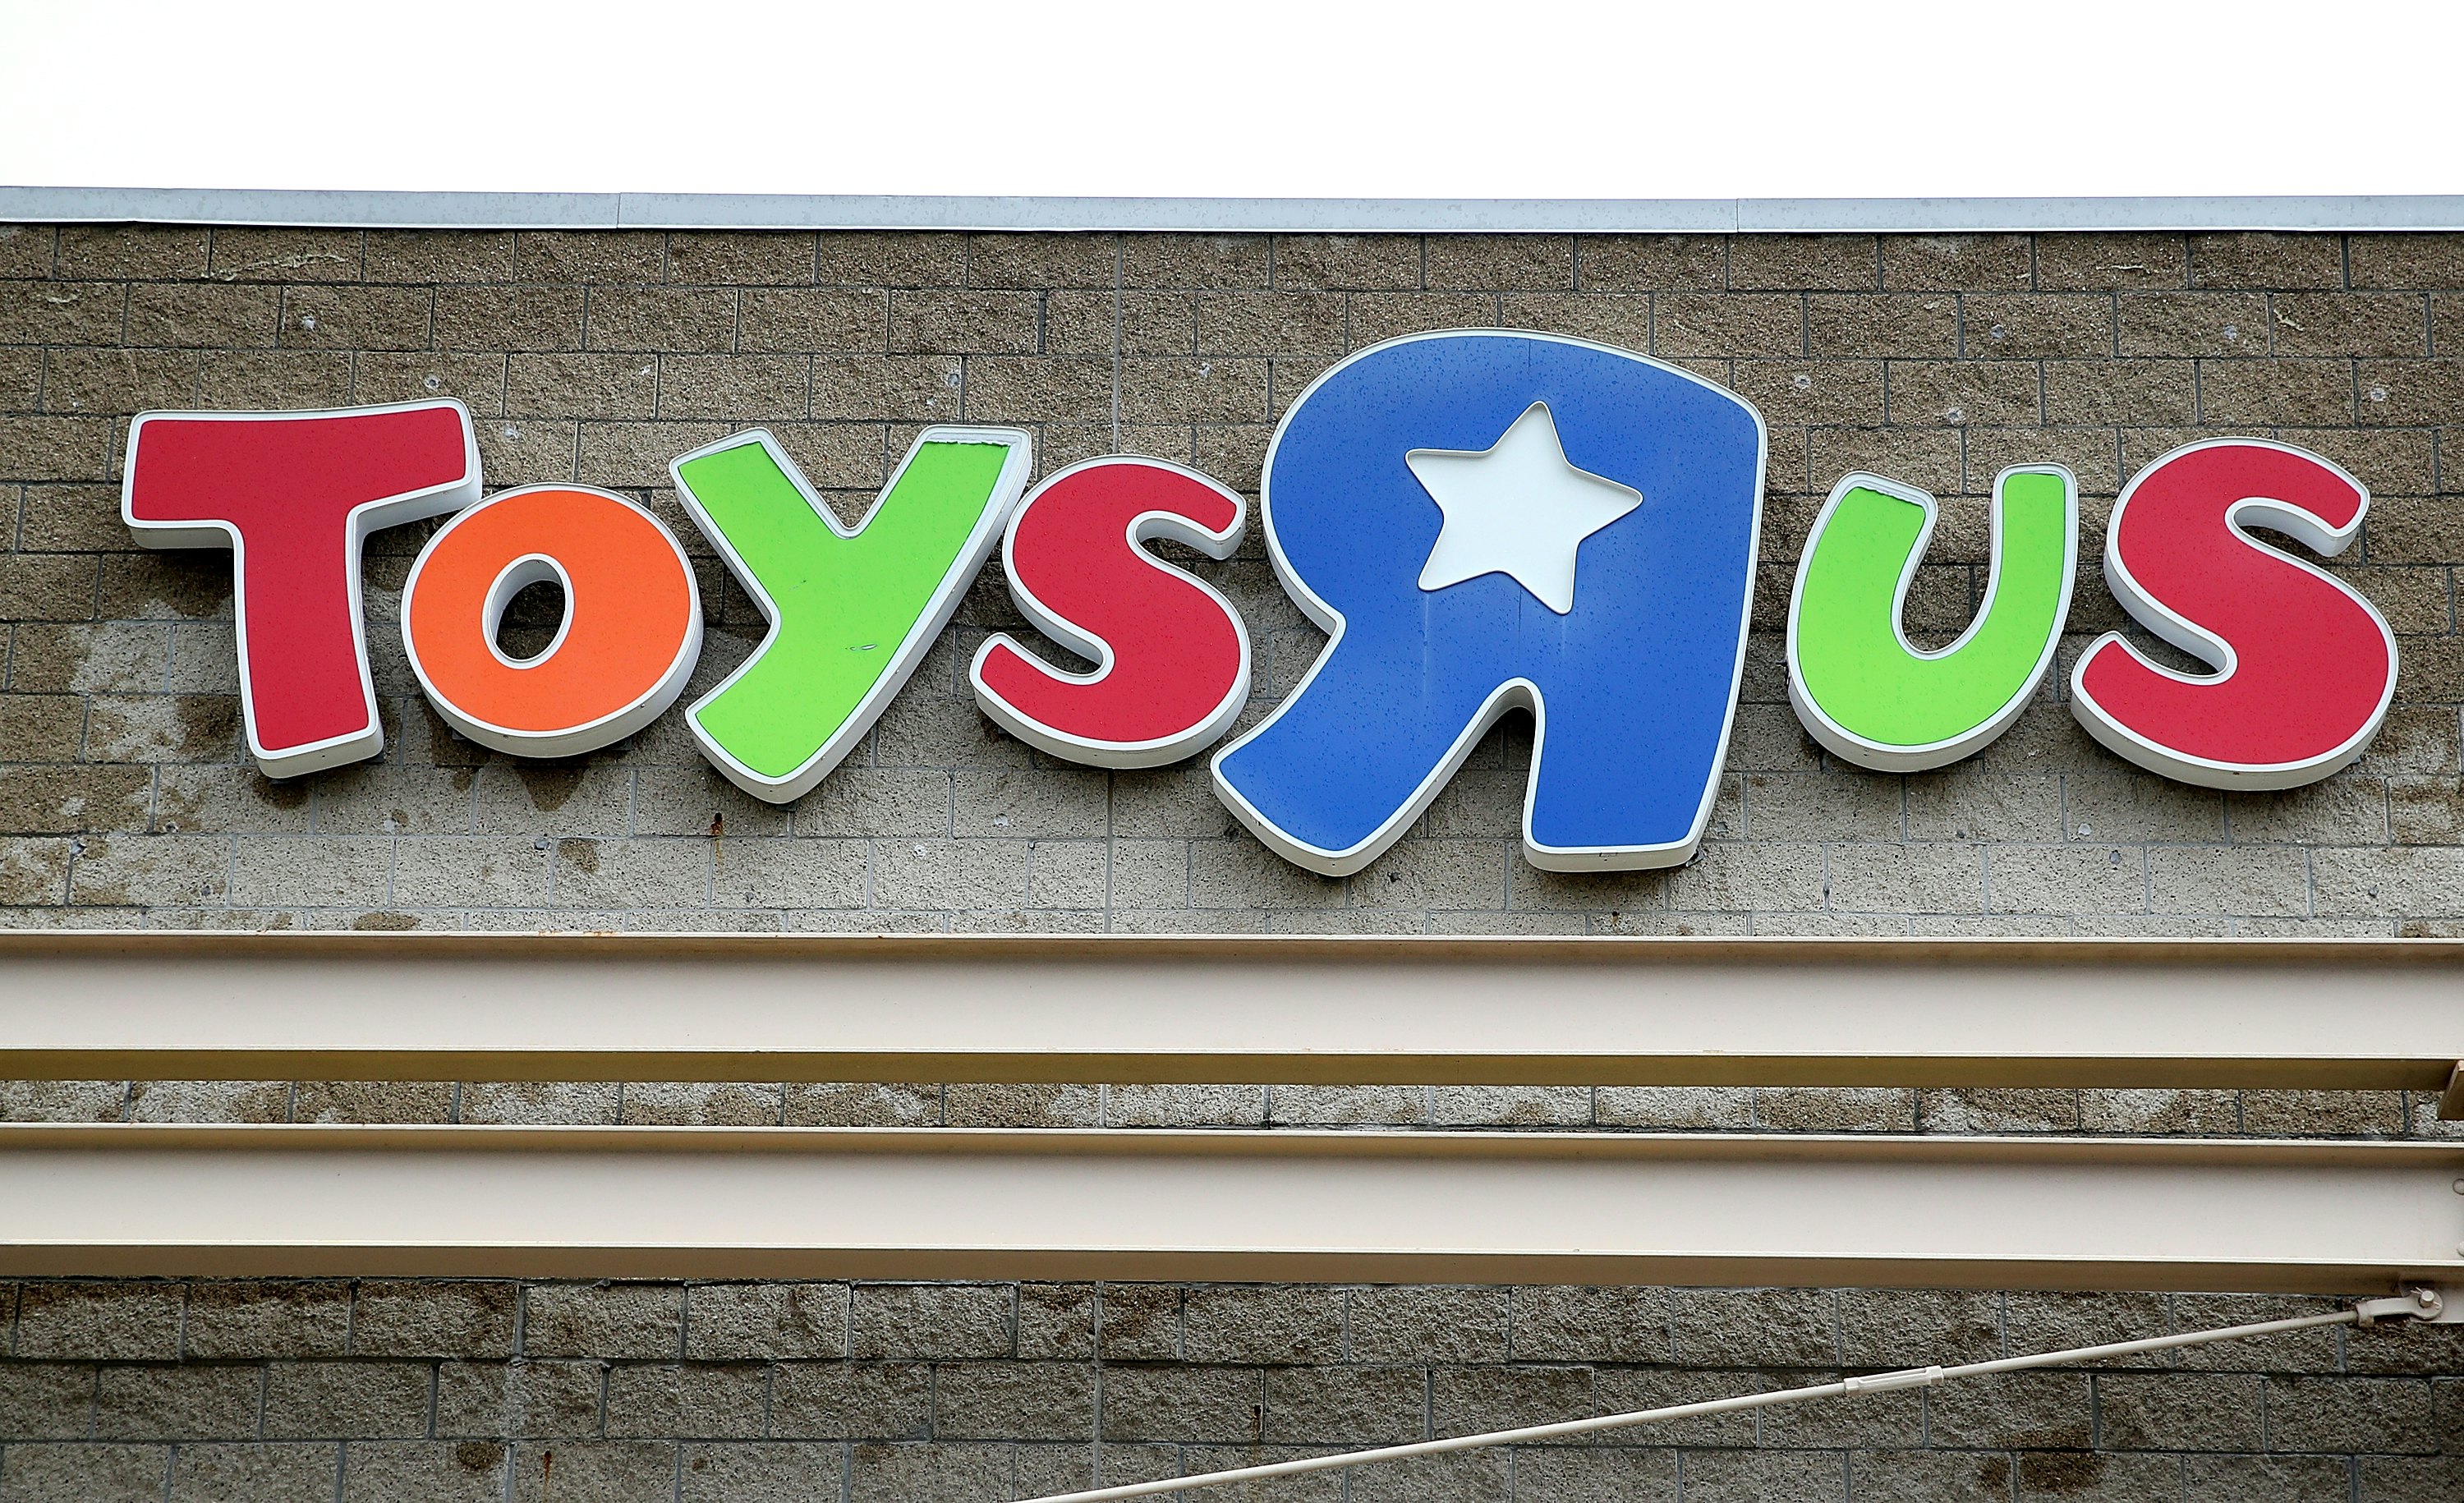 the new toys r us name